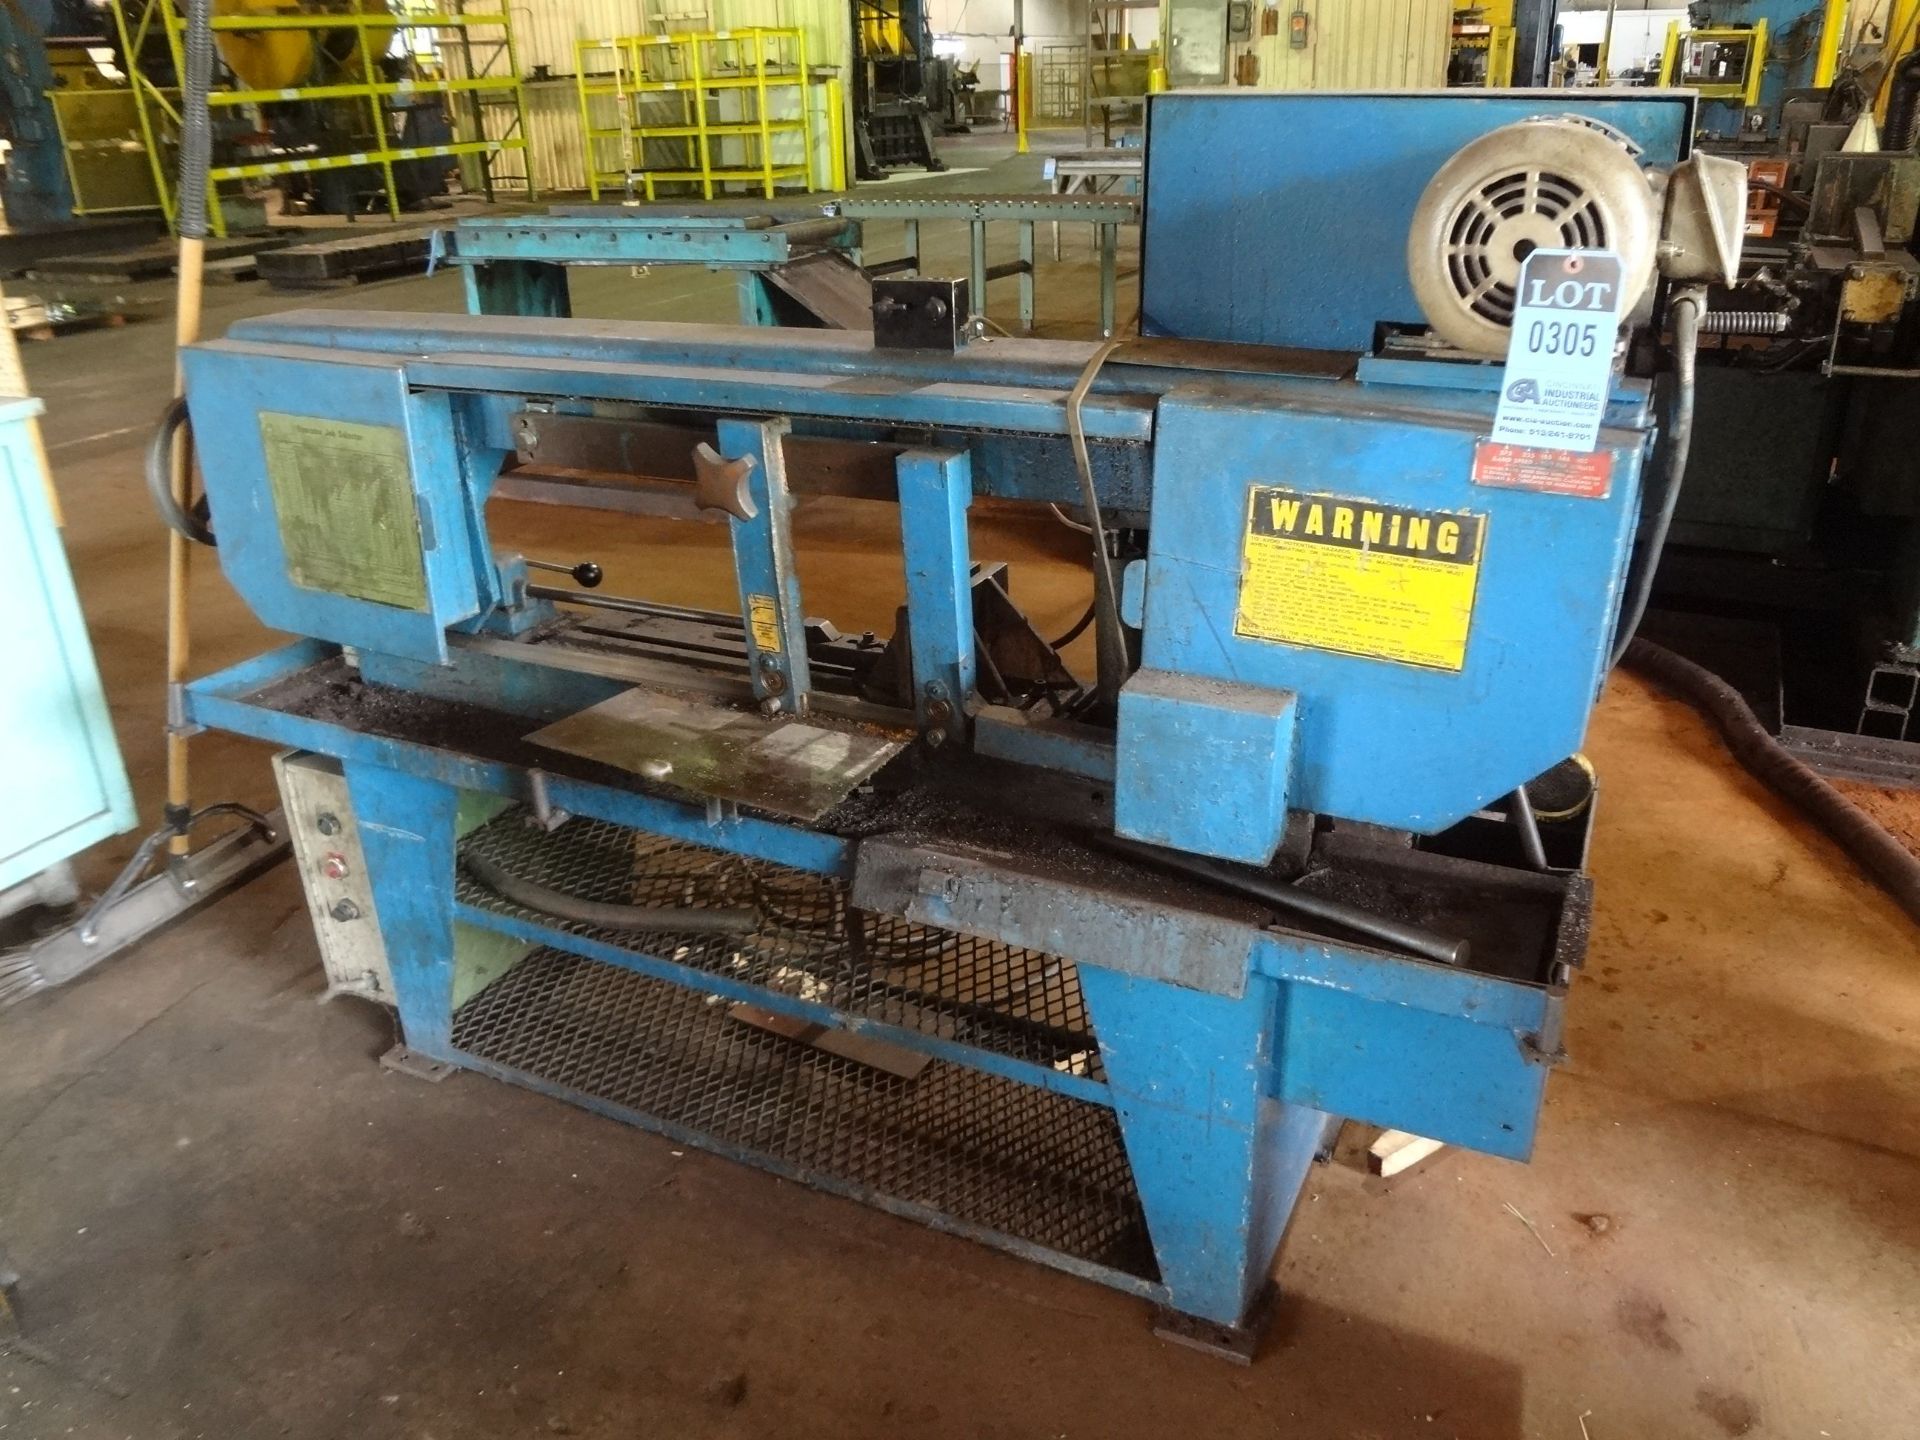 9" X 16" DOALL MODEL C-916 AUTOMATIC HORIZONTAL BAND SAW; S/N 438-85812, HYDRAULIC CLAMPING